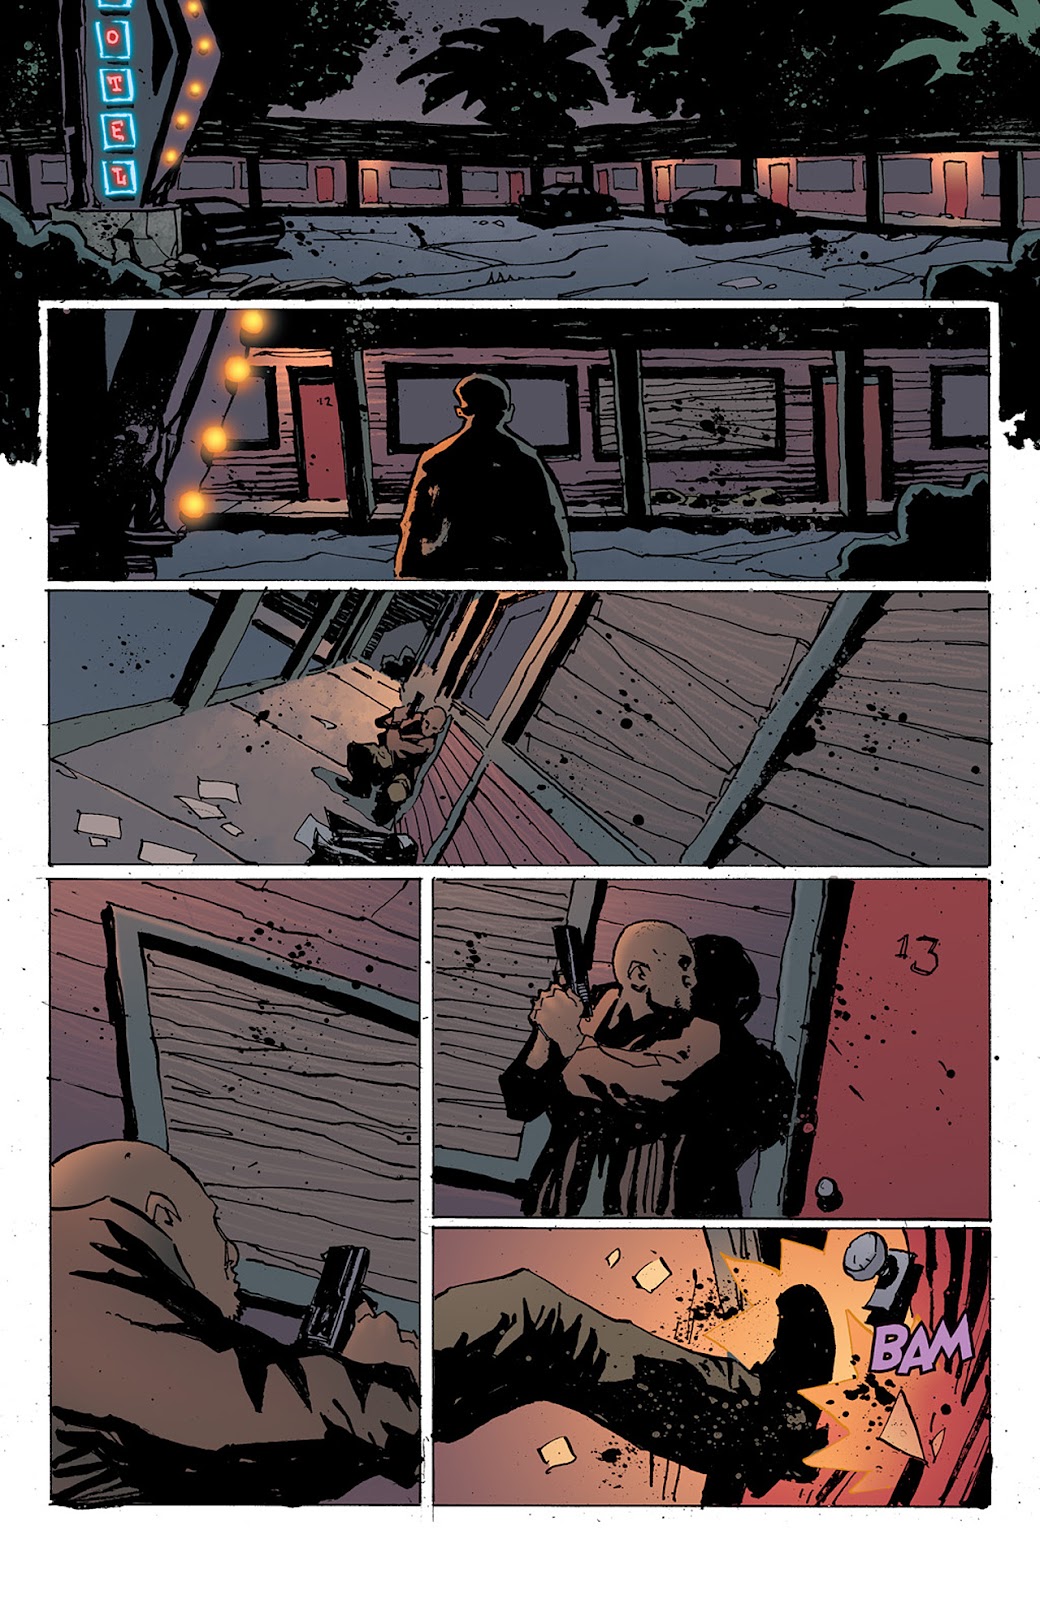 Criminal Macabre: Final Night - The 30 Days of Night Crossover issue 2 - Page 23